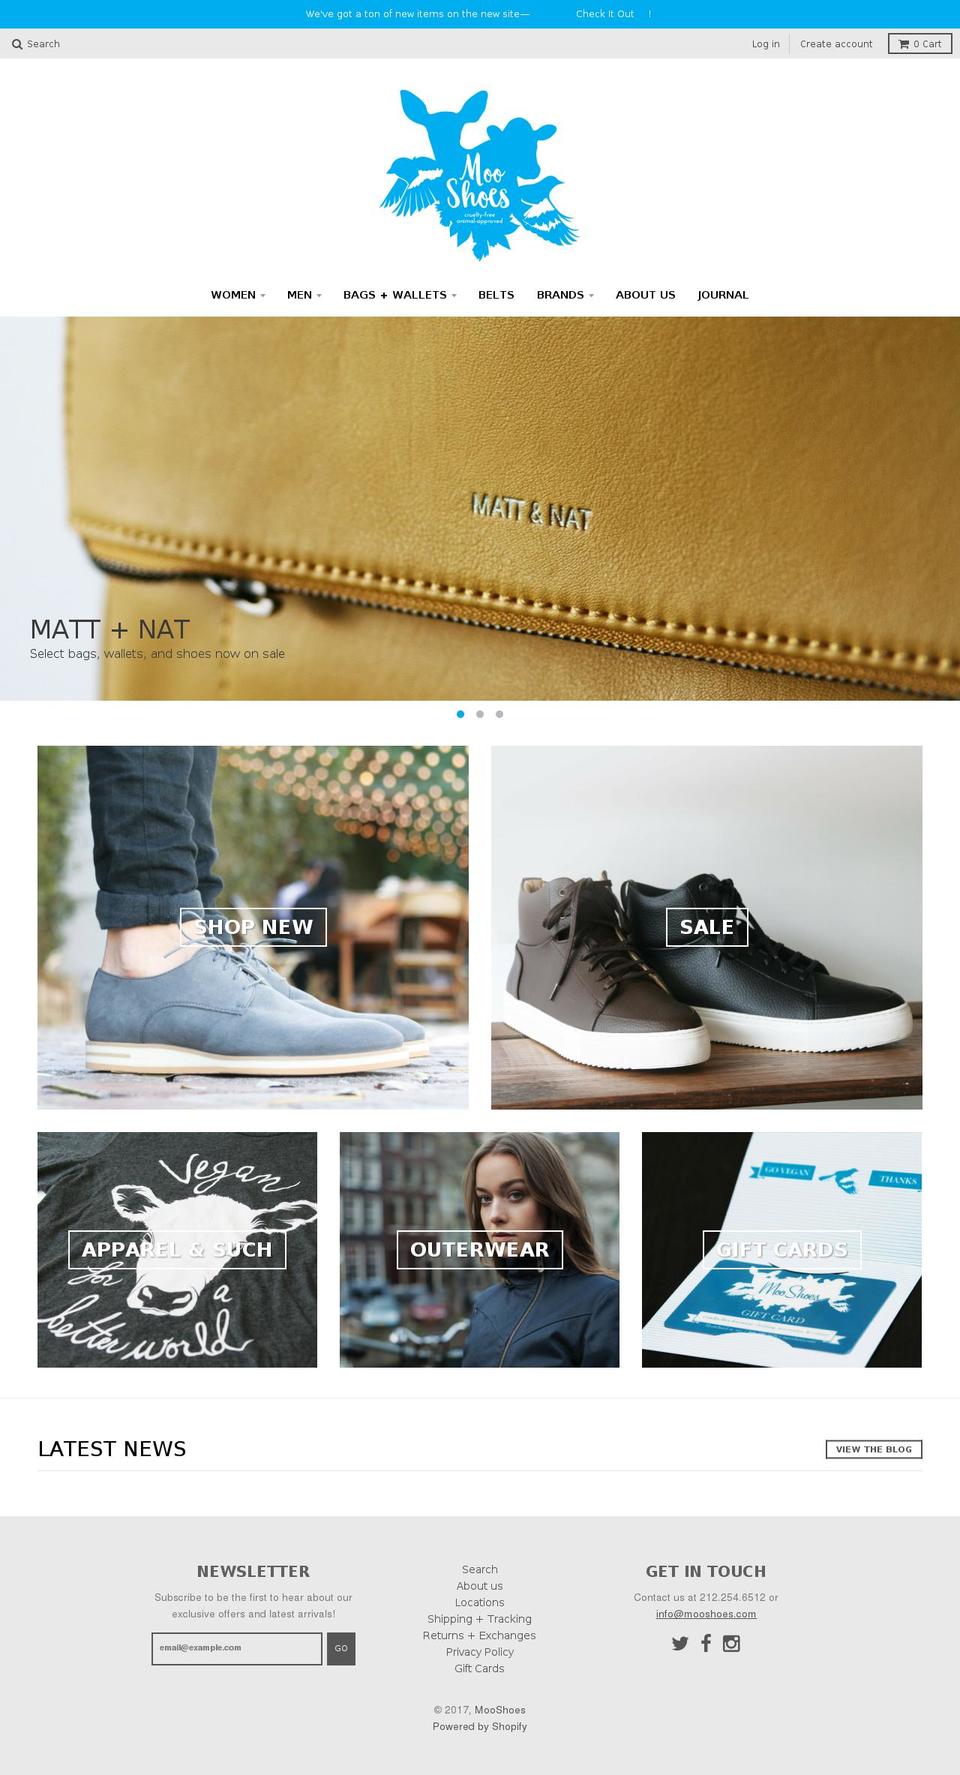 District Shopify theme site example mooshoes.com